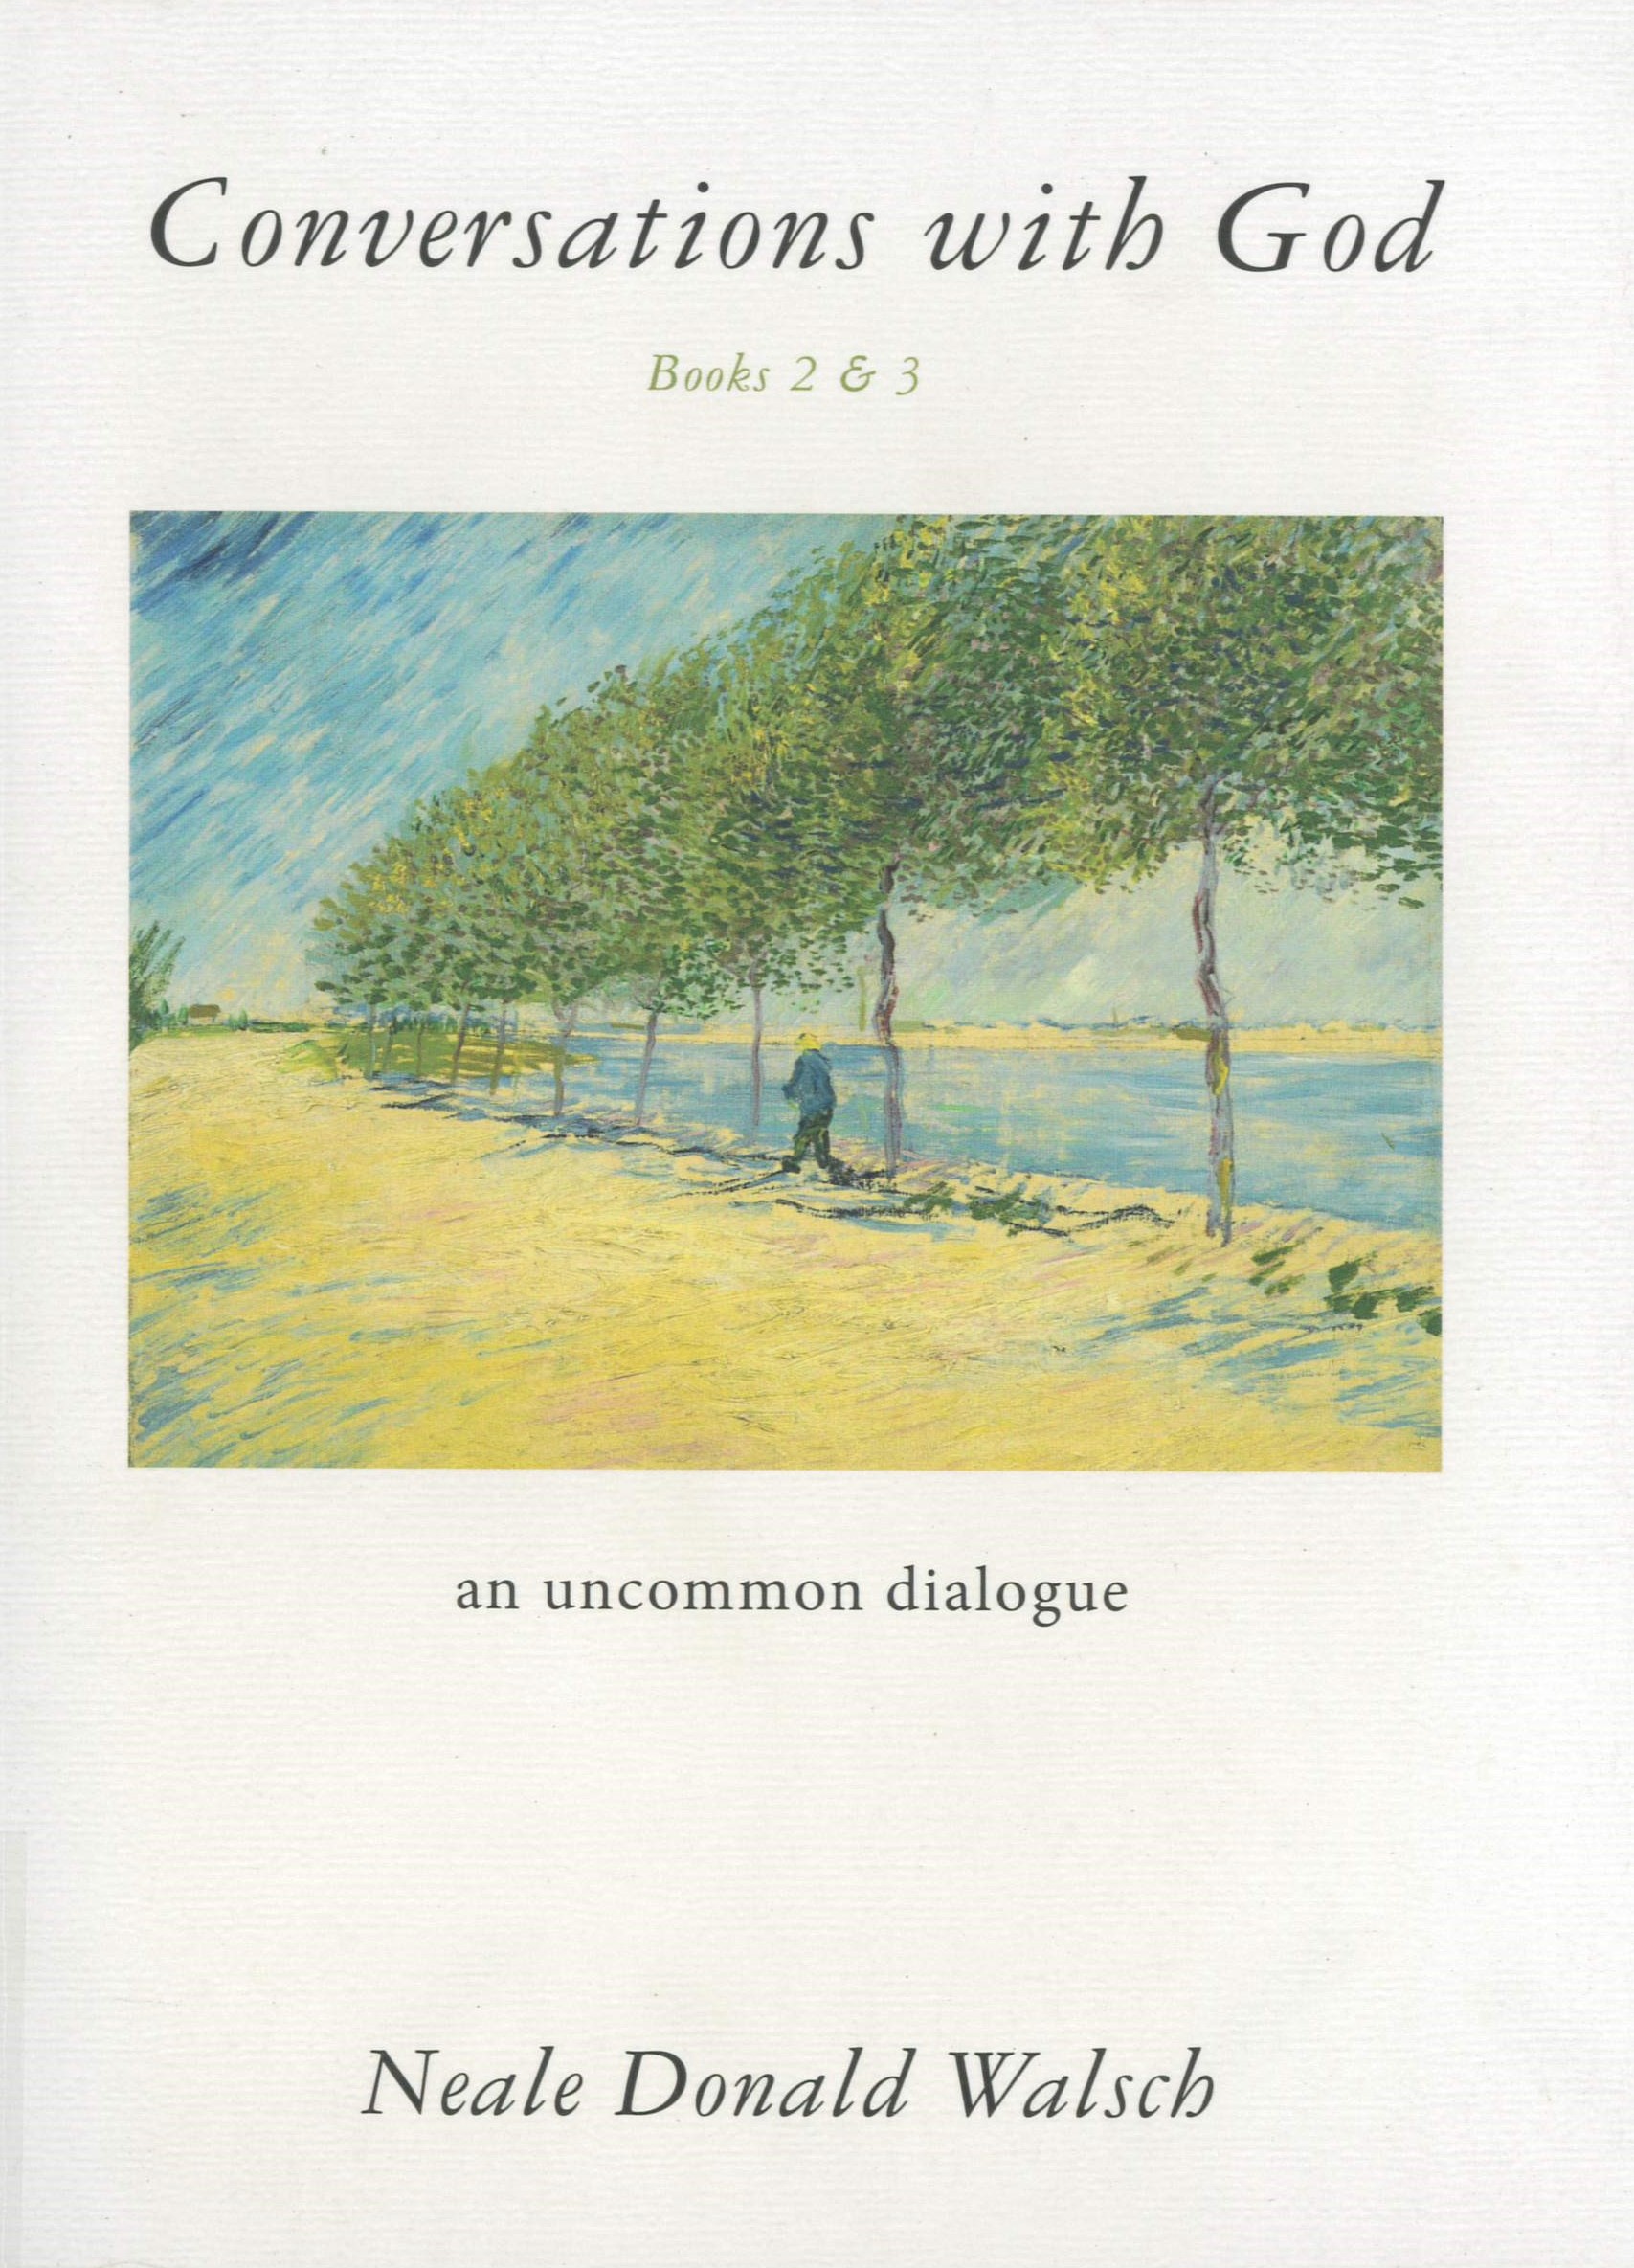 Conversations with God an uncommon dialogue[Book 2&3]